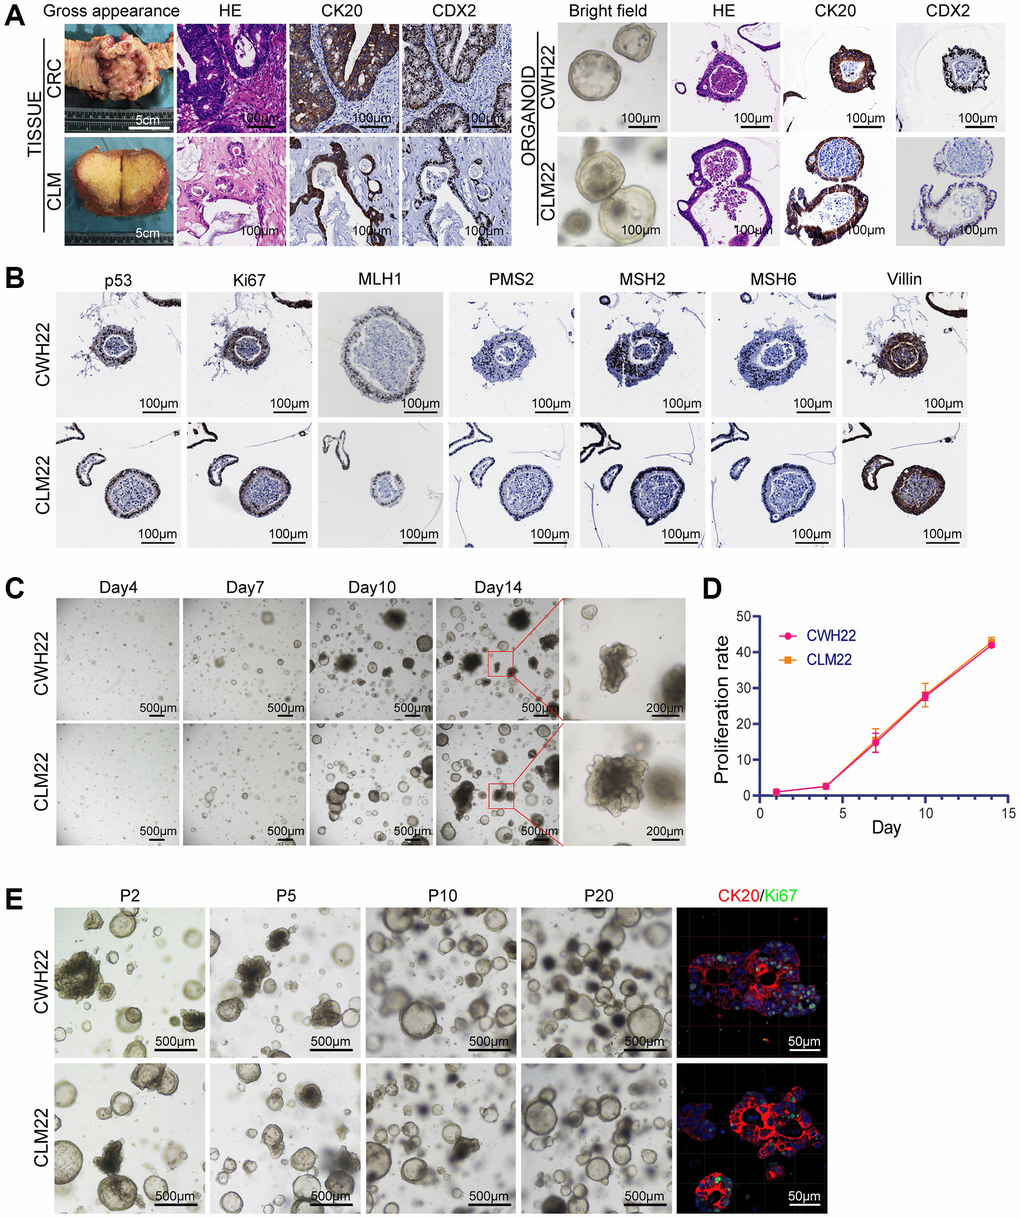 CWH22 and CLM22 organoids maintain histological and proliferative characteristics of the corresponding tumors. (A) H&E staining of the tumor organoids showing the resemblance of the organoids to the lumens and tubular structures of the primary tumor. IHC staining demonstrated consistent positive expression of CK20 and CDX2 in the organoids and corresponding tumors (scale bars, 100 μm). (B) IHC staining of CWH22 and CLM22 organoids demonstrating the consistent expression of p53, Ki67, MLH1, PMS2, MSH2, MSH6, and Villin, with the expression in CRC and CLM tissues (Supplementary Figure 1C). Scale bars, 100 μm. (C) Representative time course of CWH22 and CLM22 organoid growth for 14 days (scale bars, 500 μm) and local field amplification (scale bars, 200 μm). (D) Analysis of the proliferation rates of CWH22 and CLM22 organoids over time using 3D cell viability tests. (E) Bright-field images showing the morphology of CWH22 and CLM22 organoids at the 2nd, 5th, 10th, and 20th passages (P2, P5, P10, and P20, respectively; scale bars, 500 μm), and the expression of CK20 and Ki67 in representative differentiated organoids from CWH22 and CLM22 (scale bars, 50 μm).